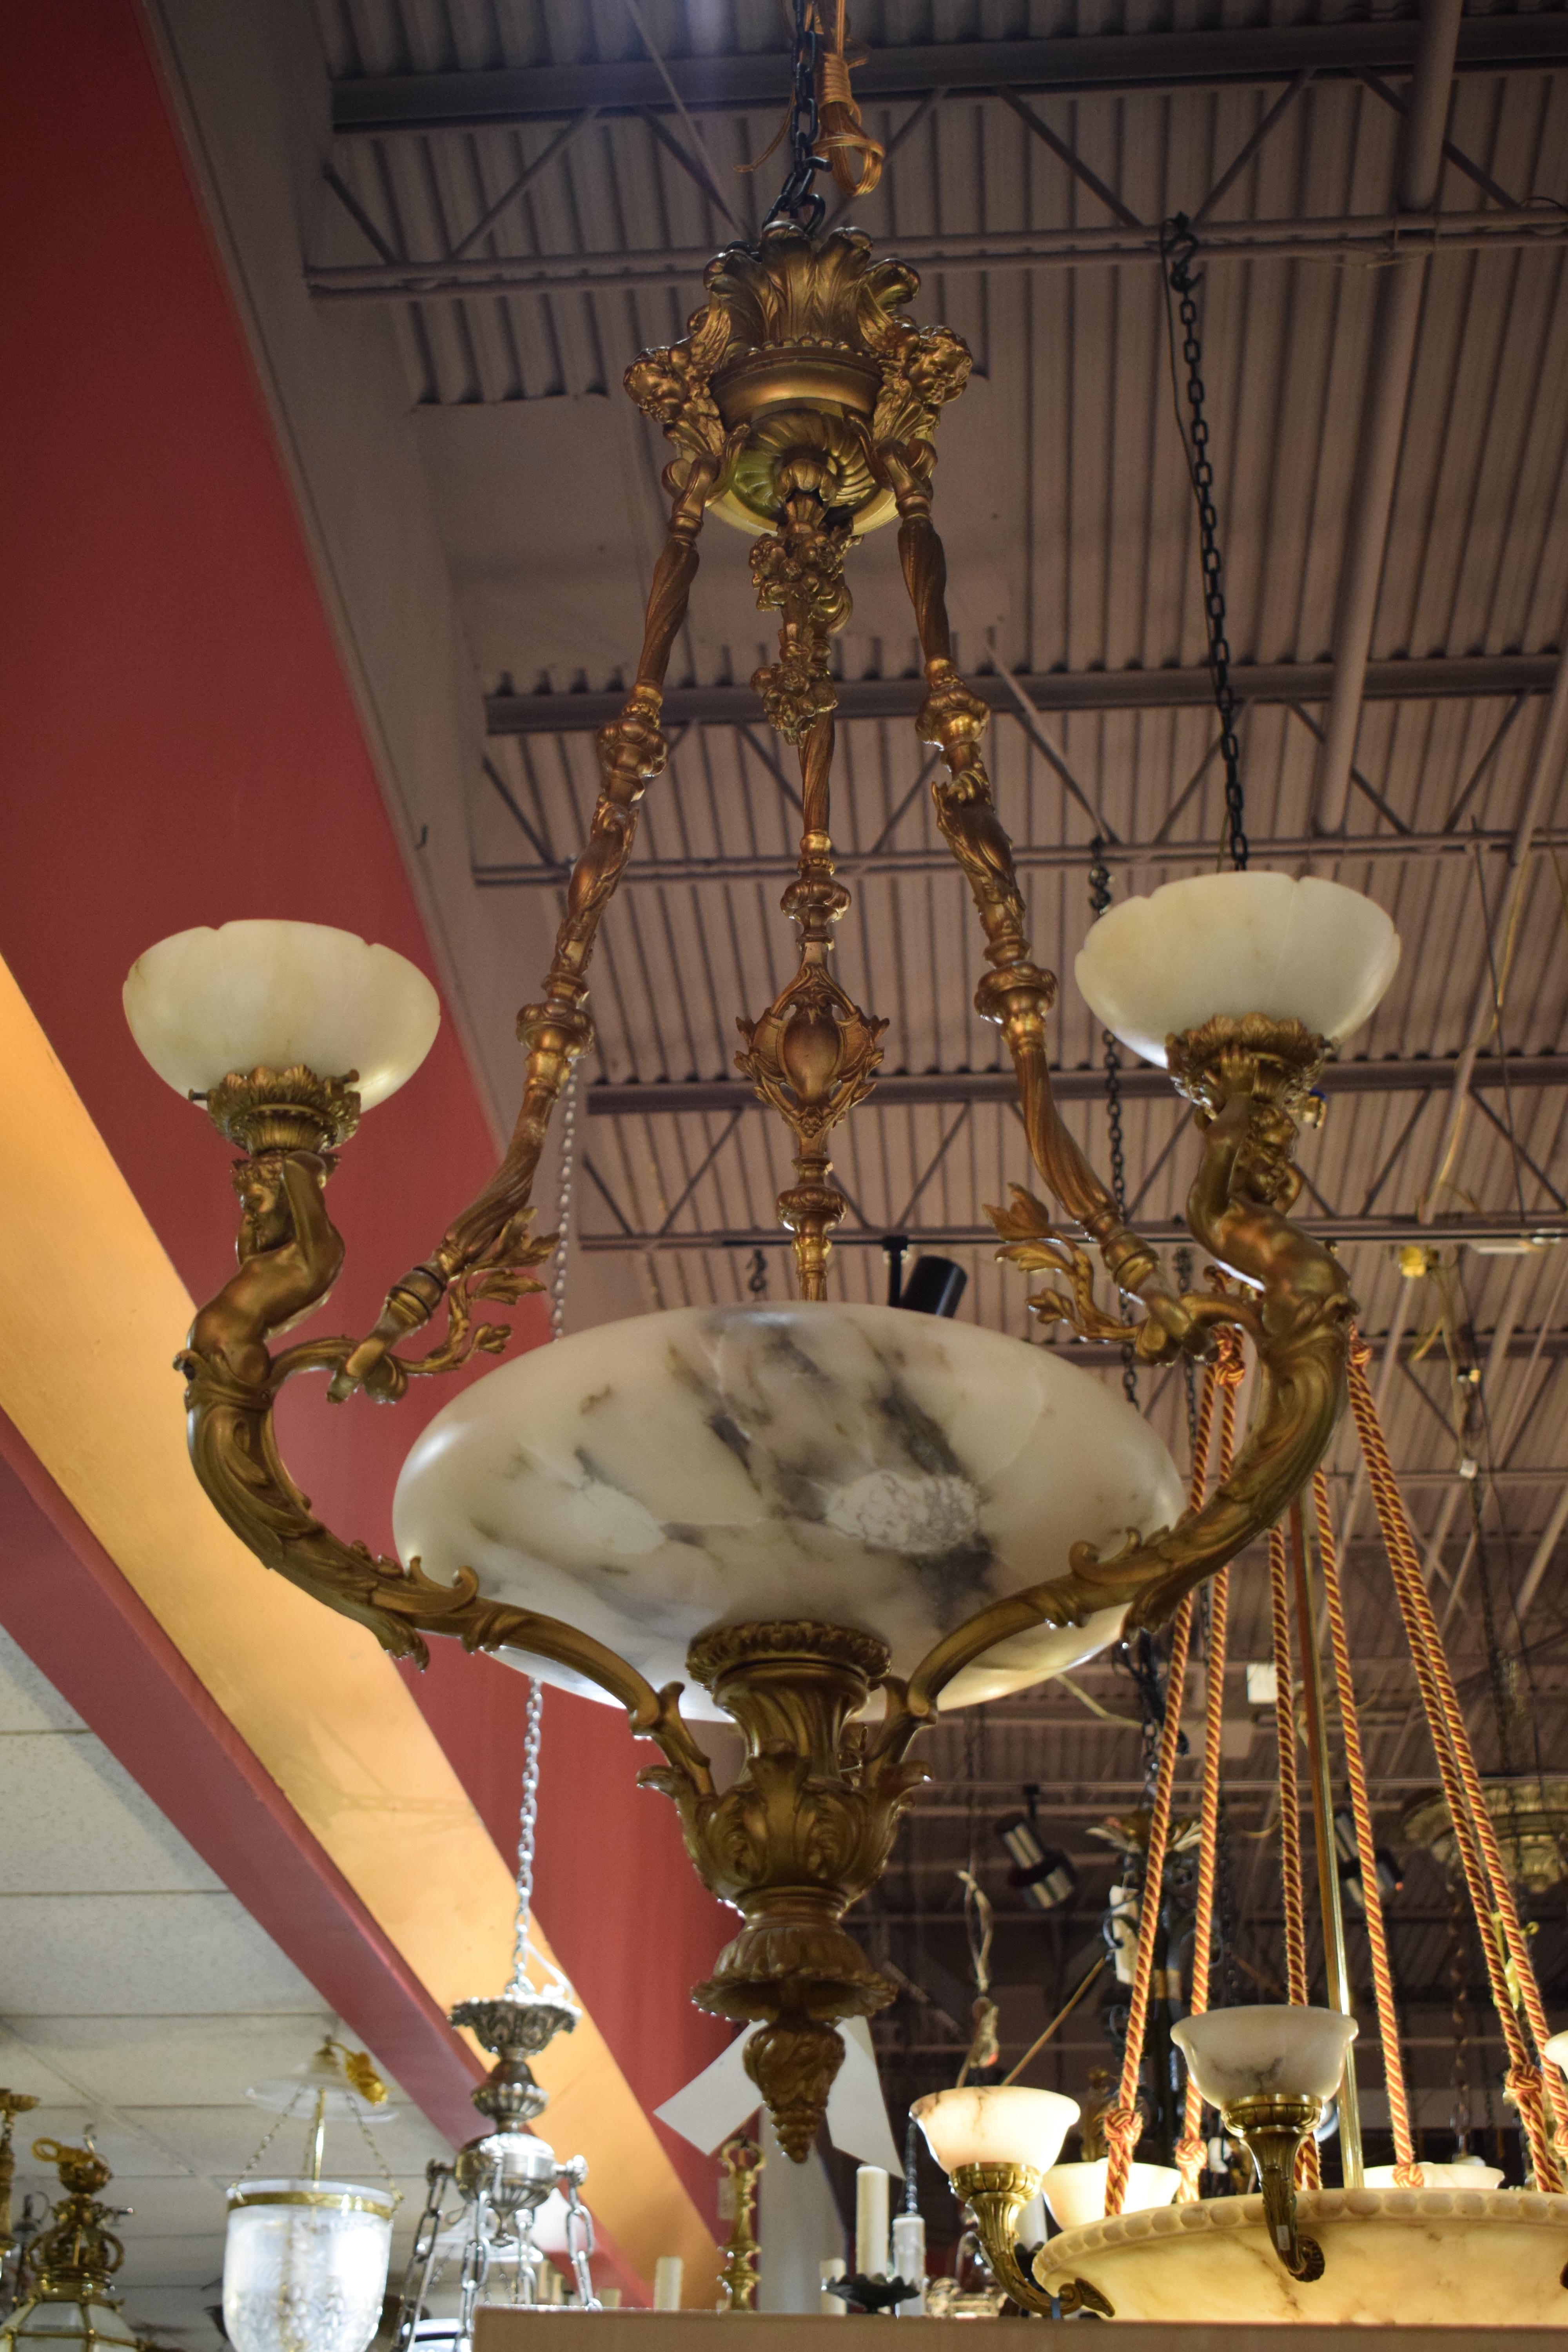 A fine & unusual gilt bronze & alabaster chandelier. 6 lights ( 3 inside & 3 outside). Bowl as is.
Dimensions: height 42